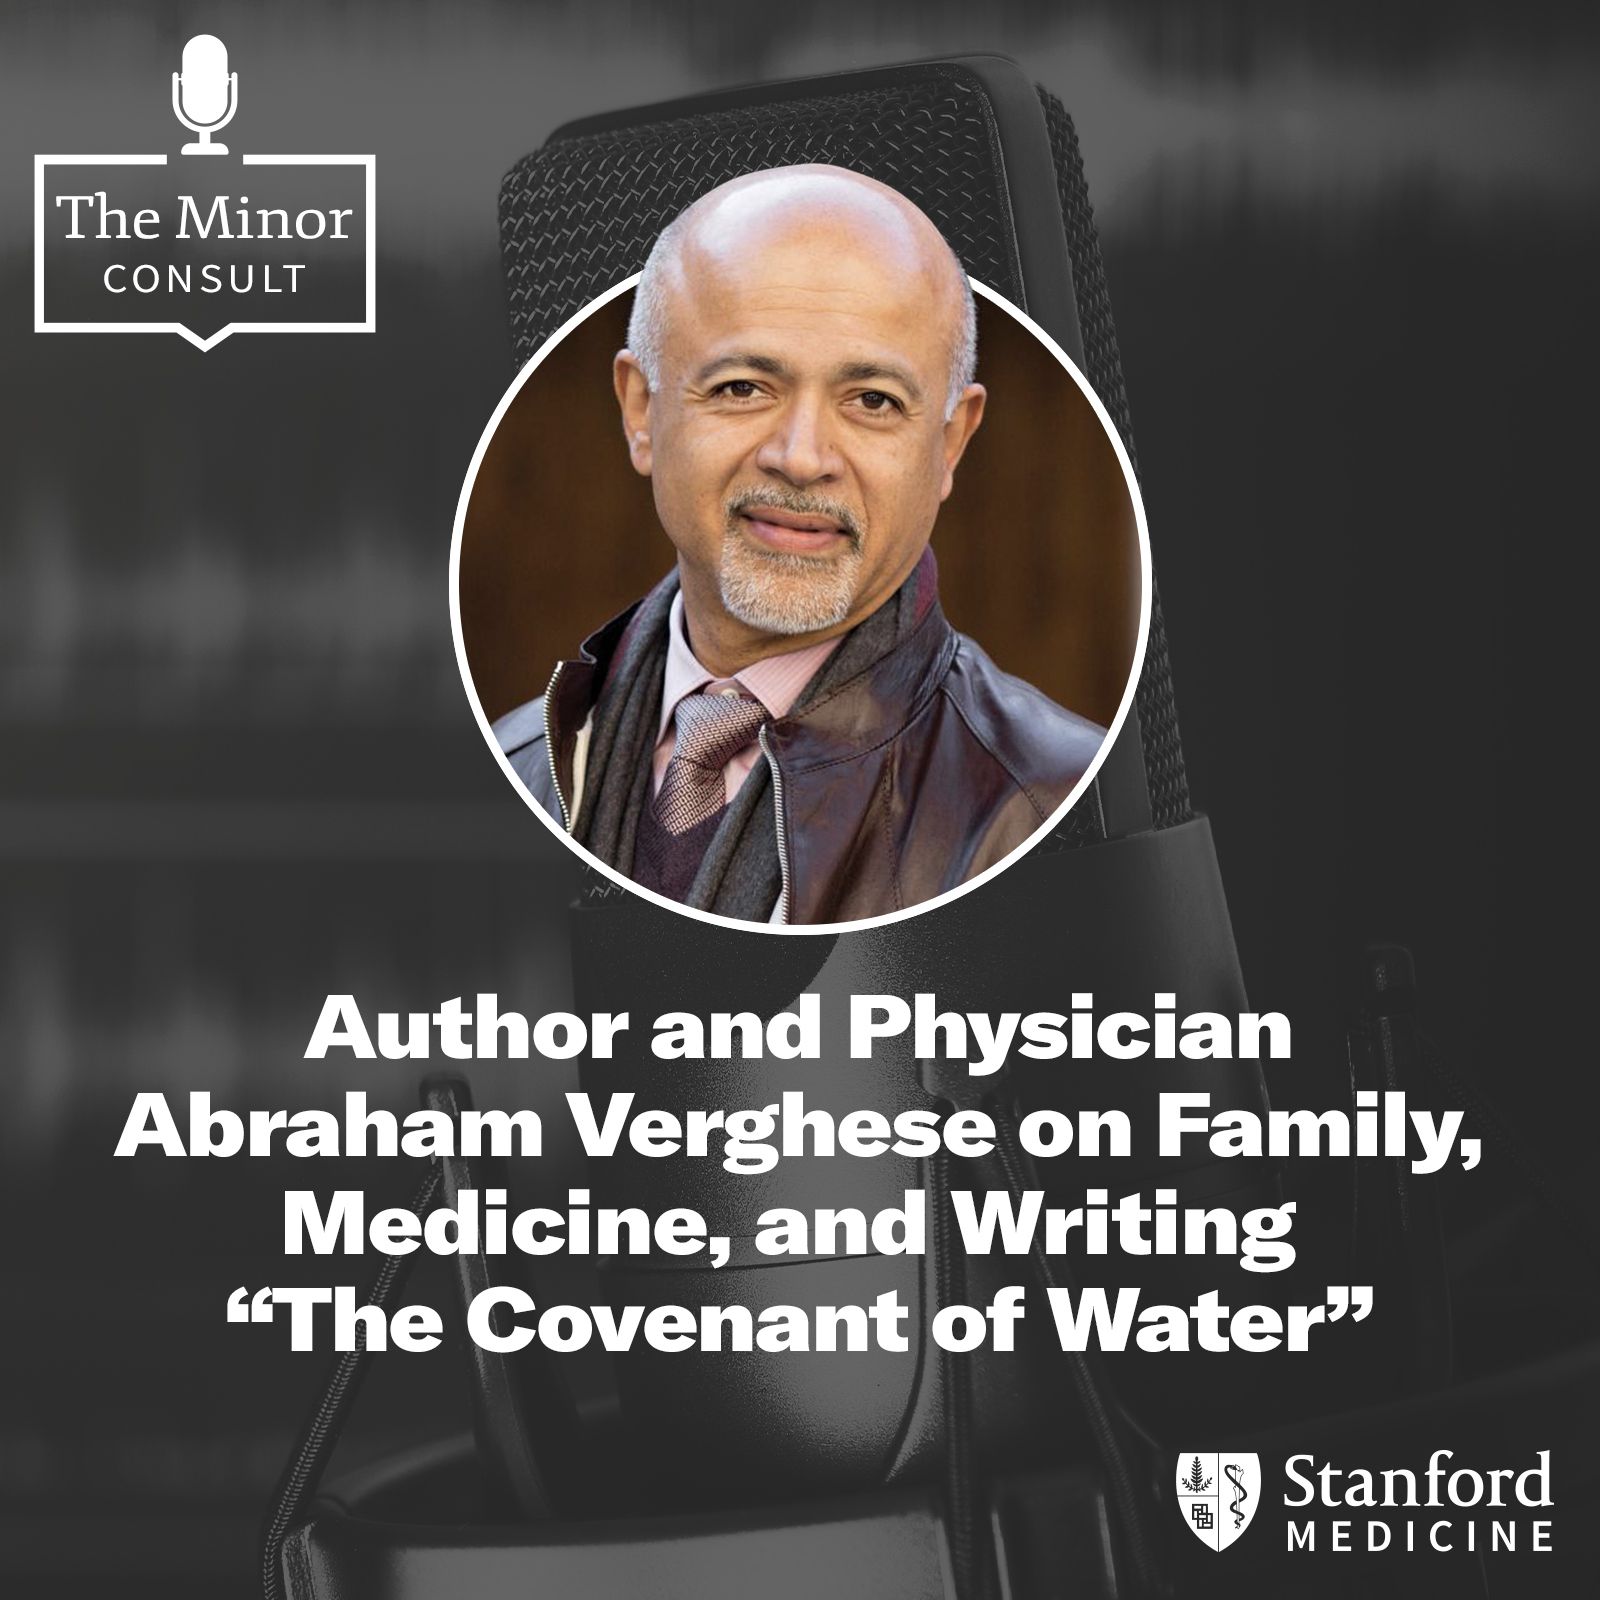 S5 Ep2: Author & Physician Abraham Verghese on Family, Medicine, and Writing “The Covenant of Water”